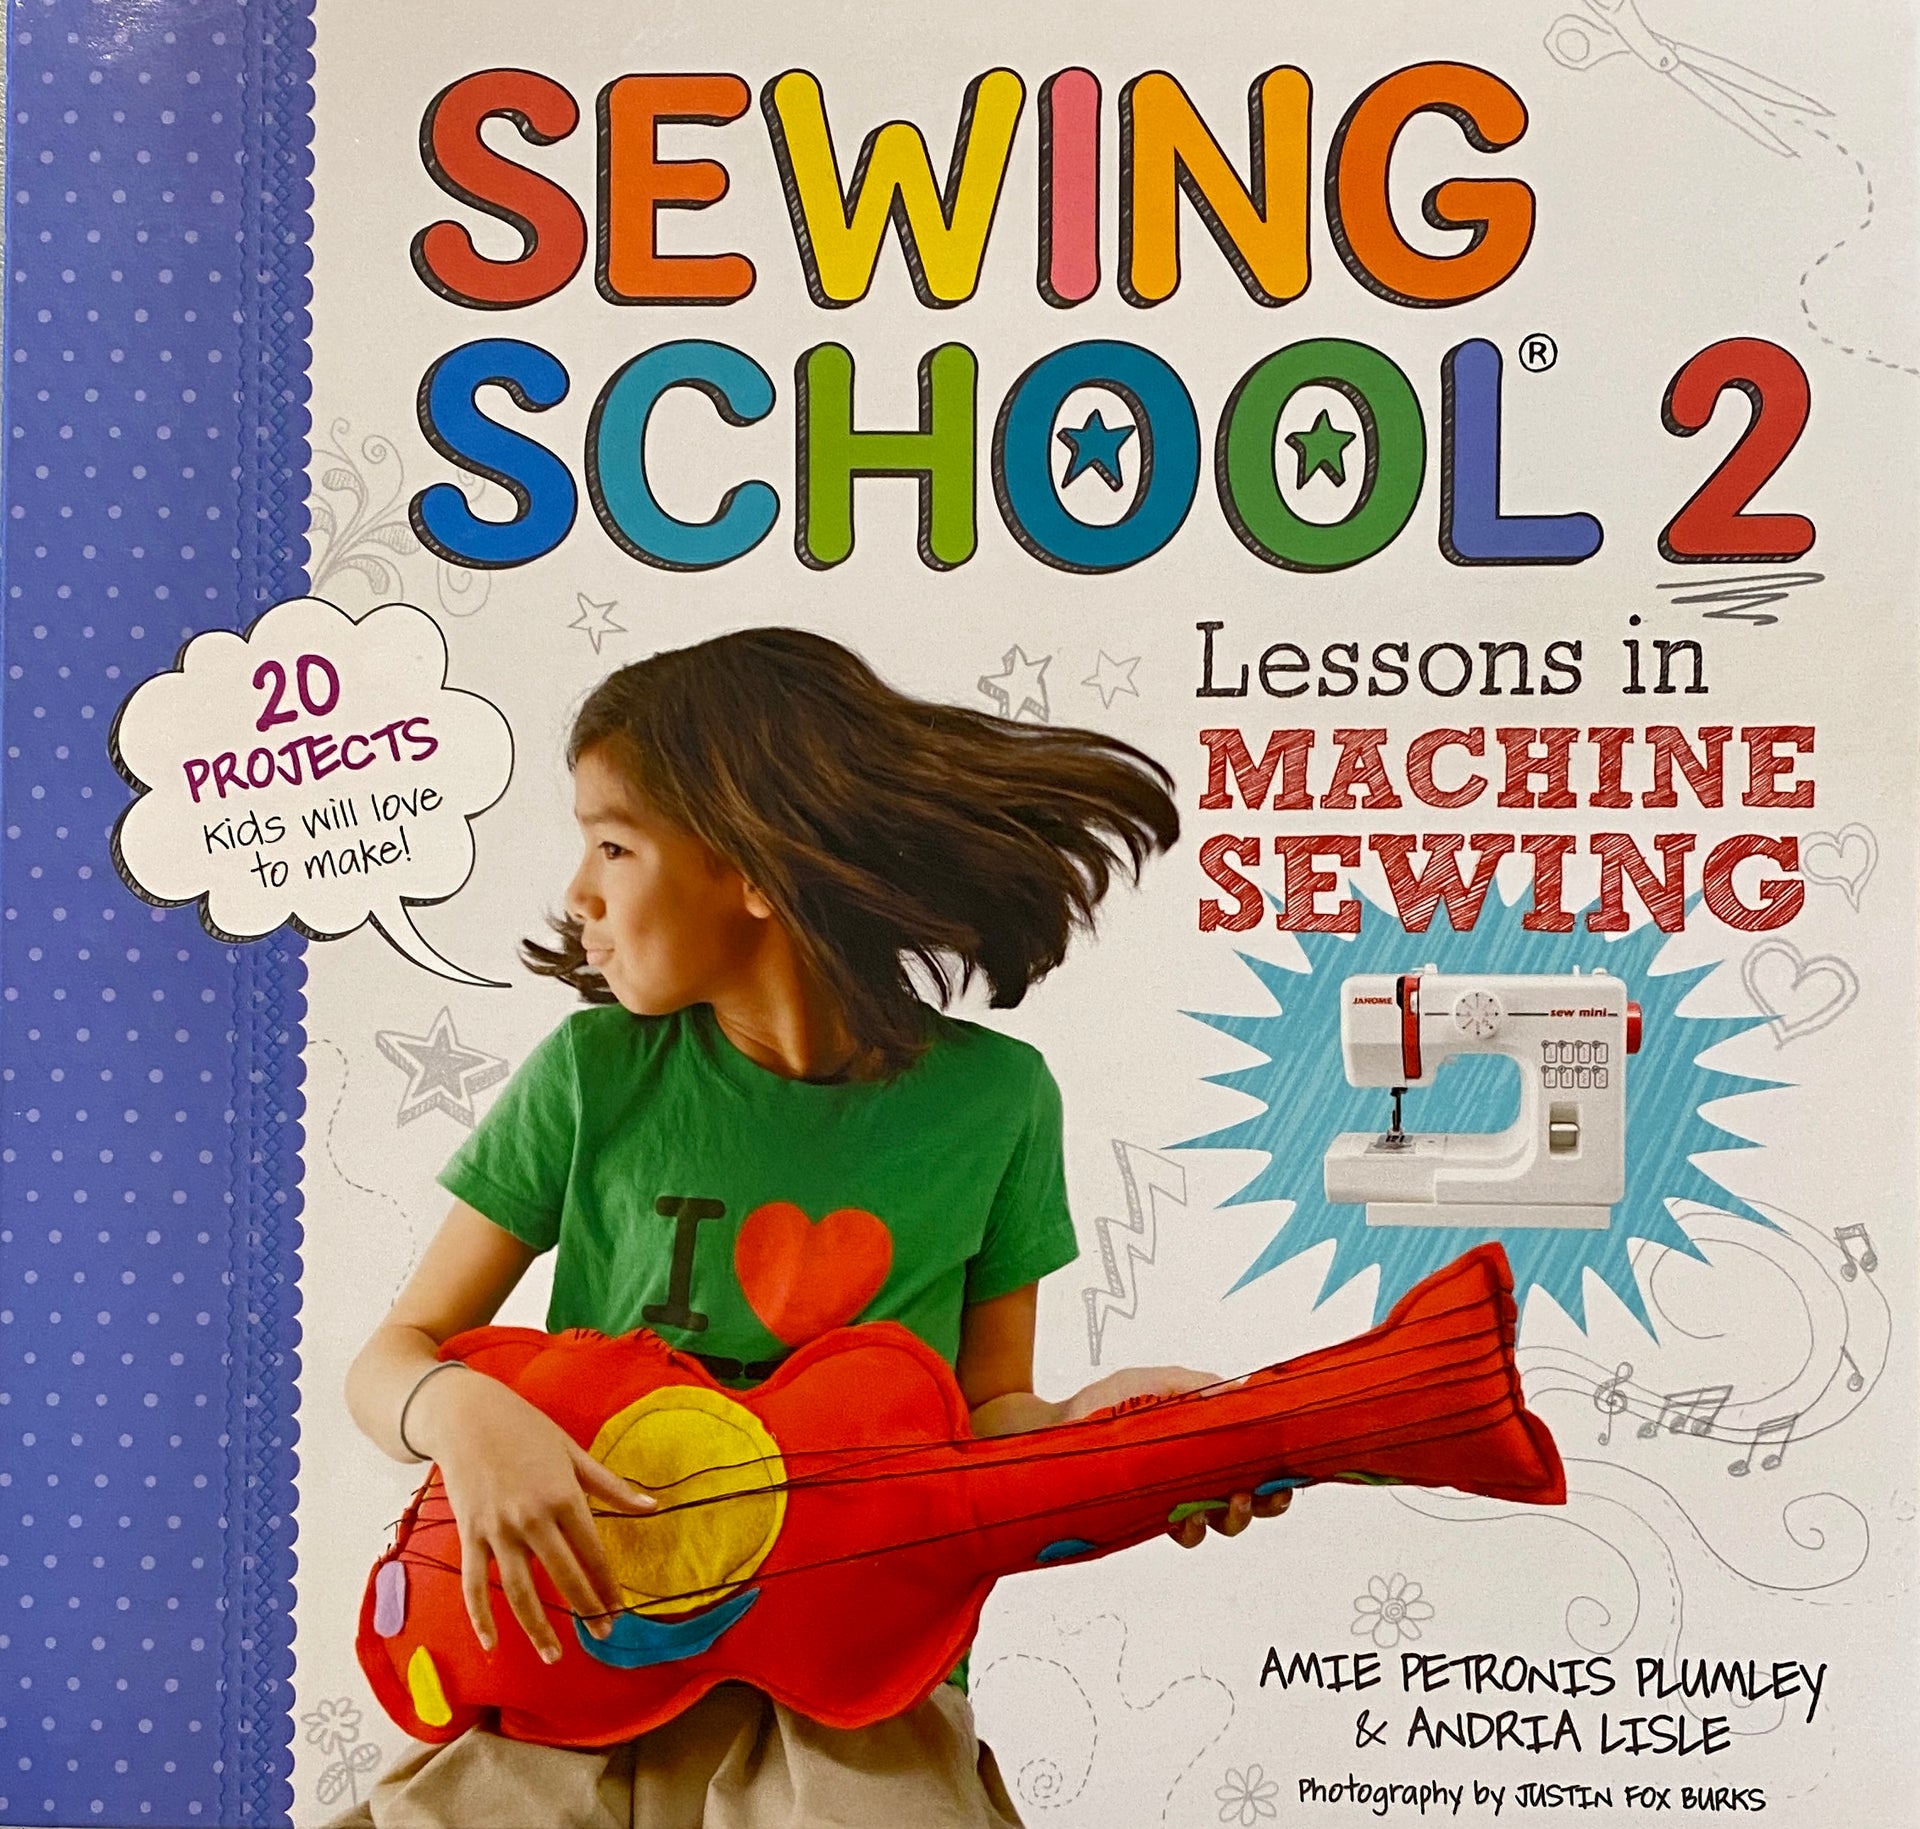 Learning to Sew Part 2: How to Stitch 